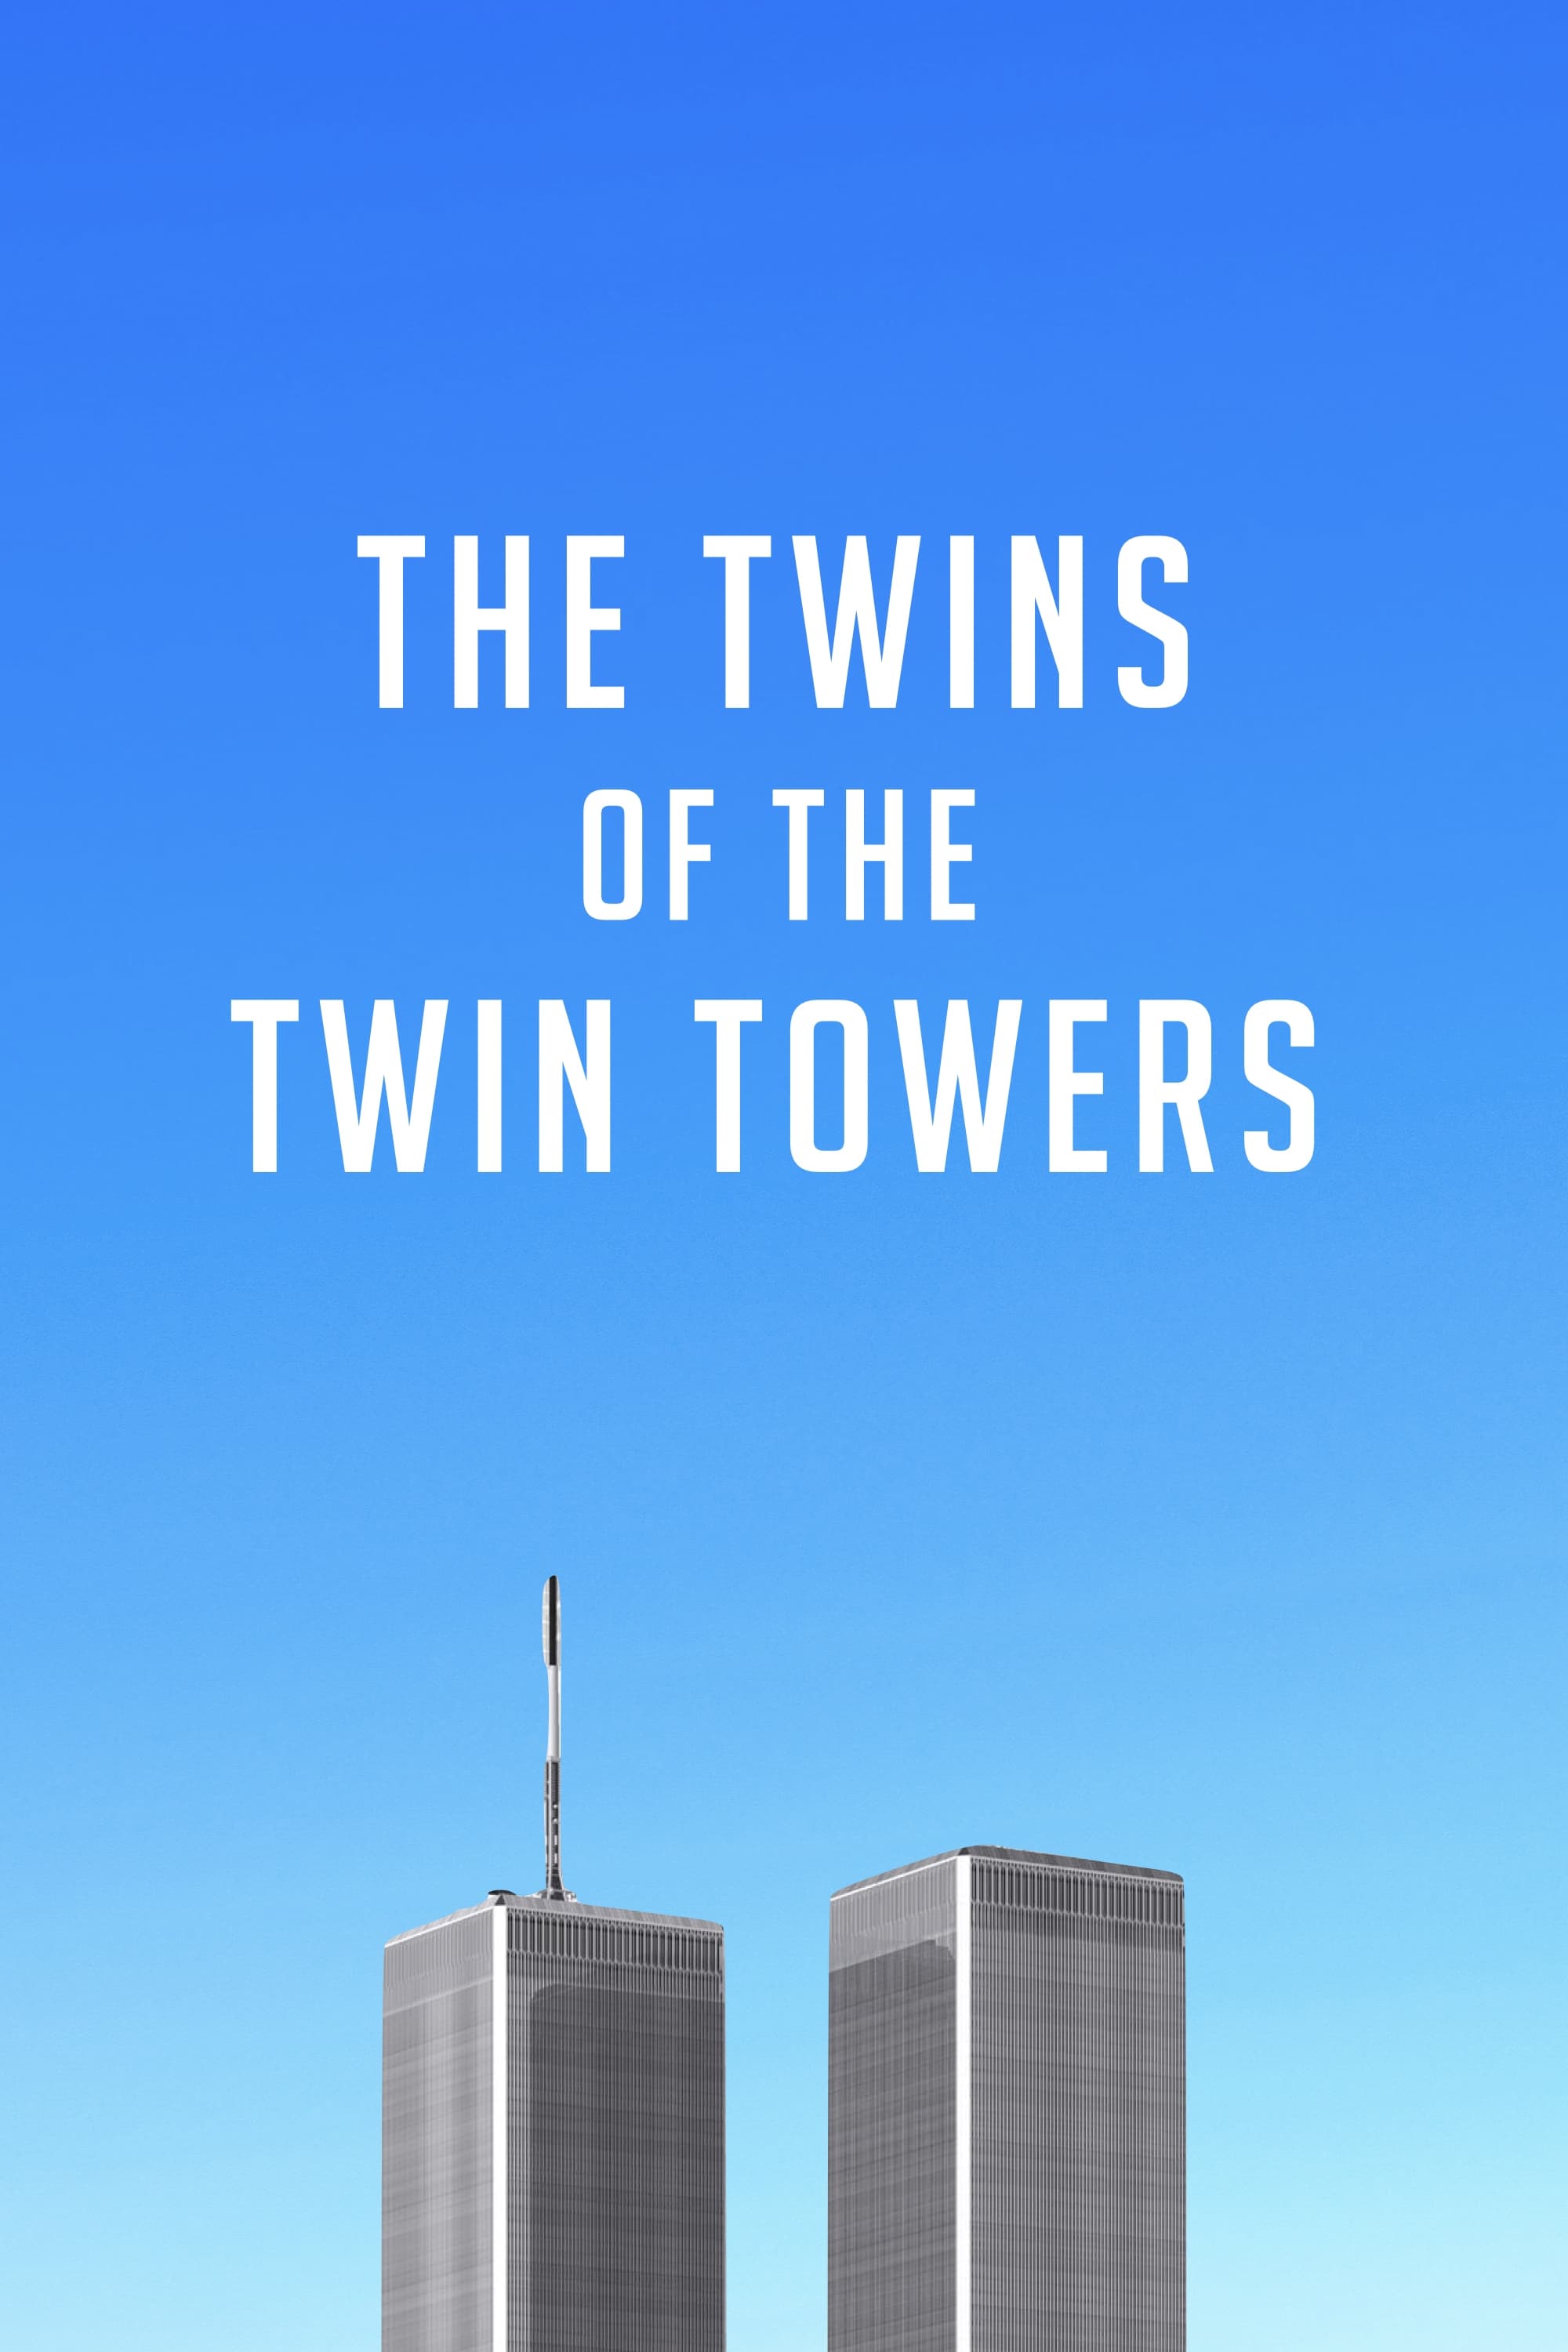 The Twins of the Twin Towers